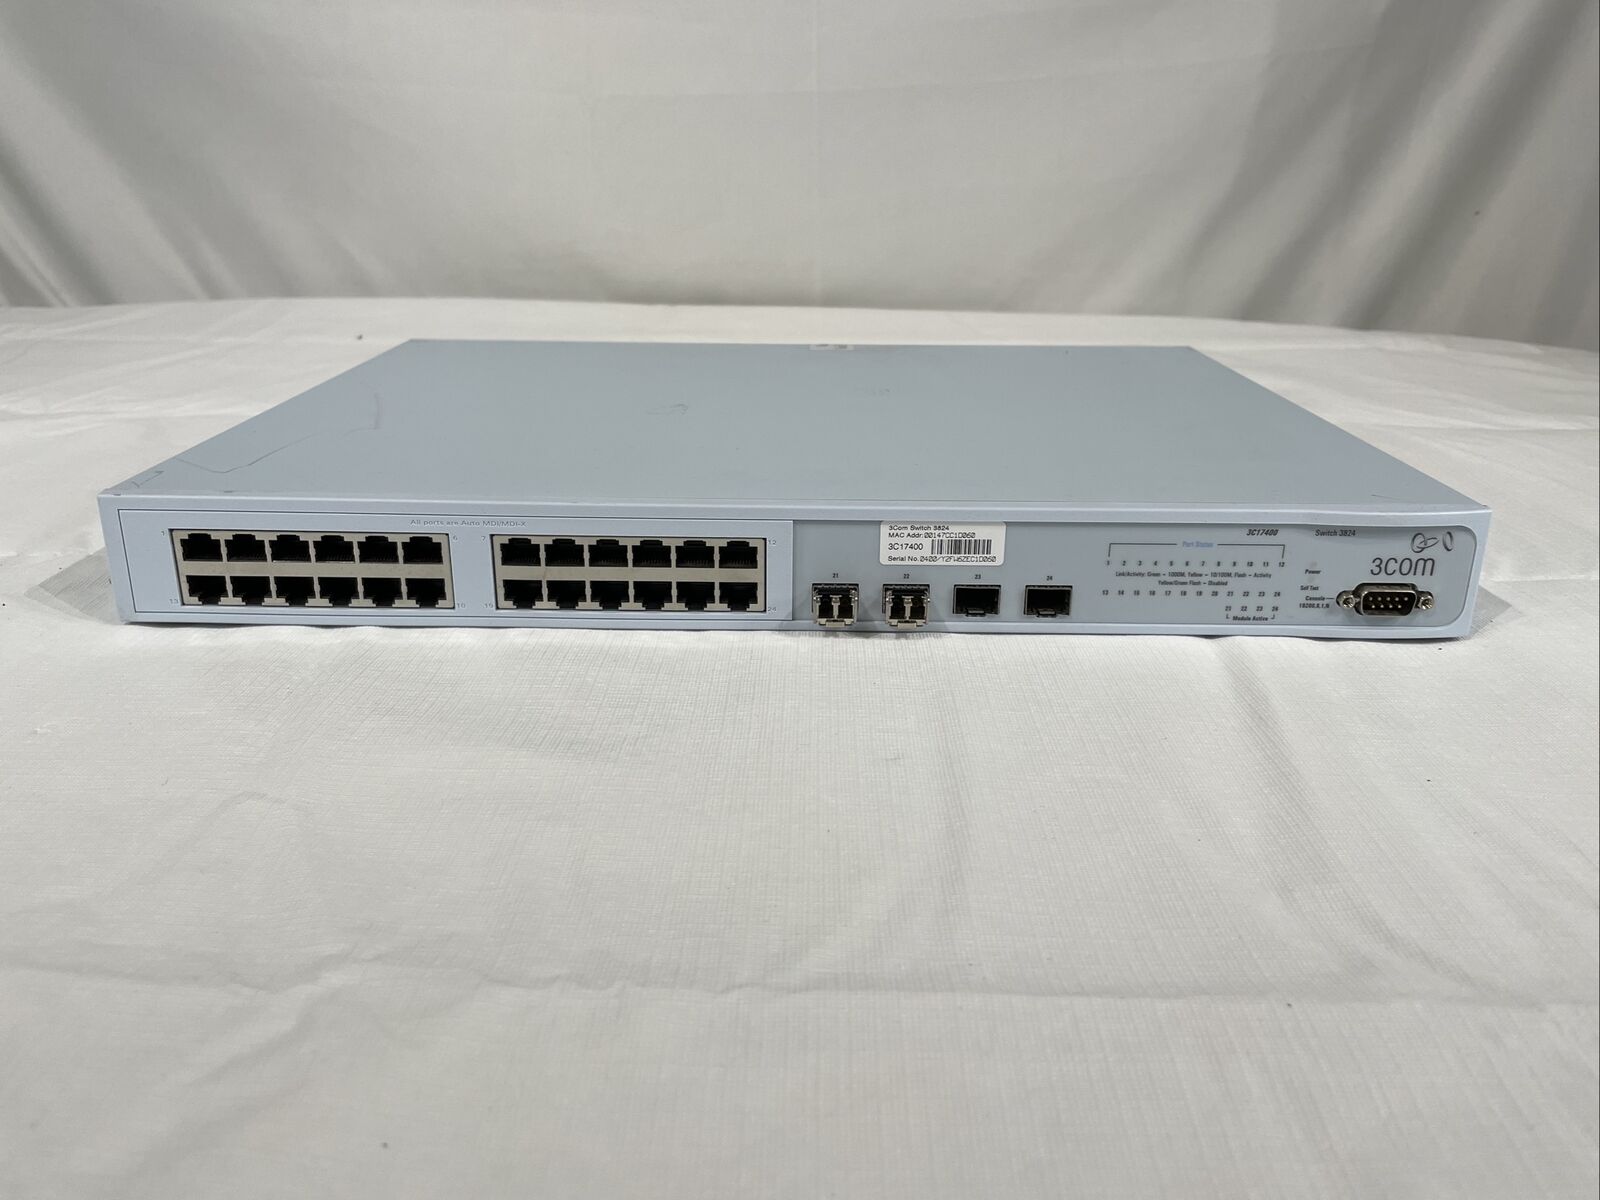 3Com 3C17400 Switch 3824 24-Port Network Ethernet Switch *Tested Working*